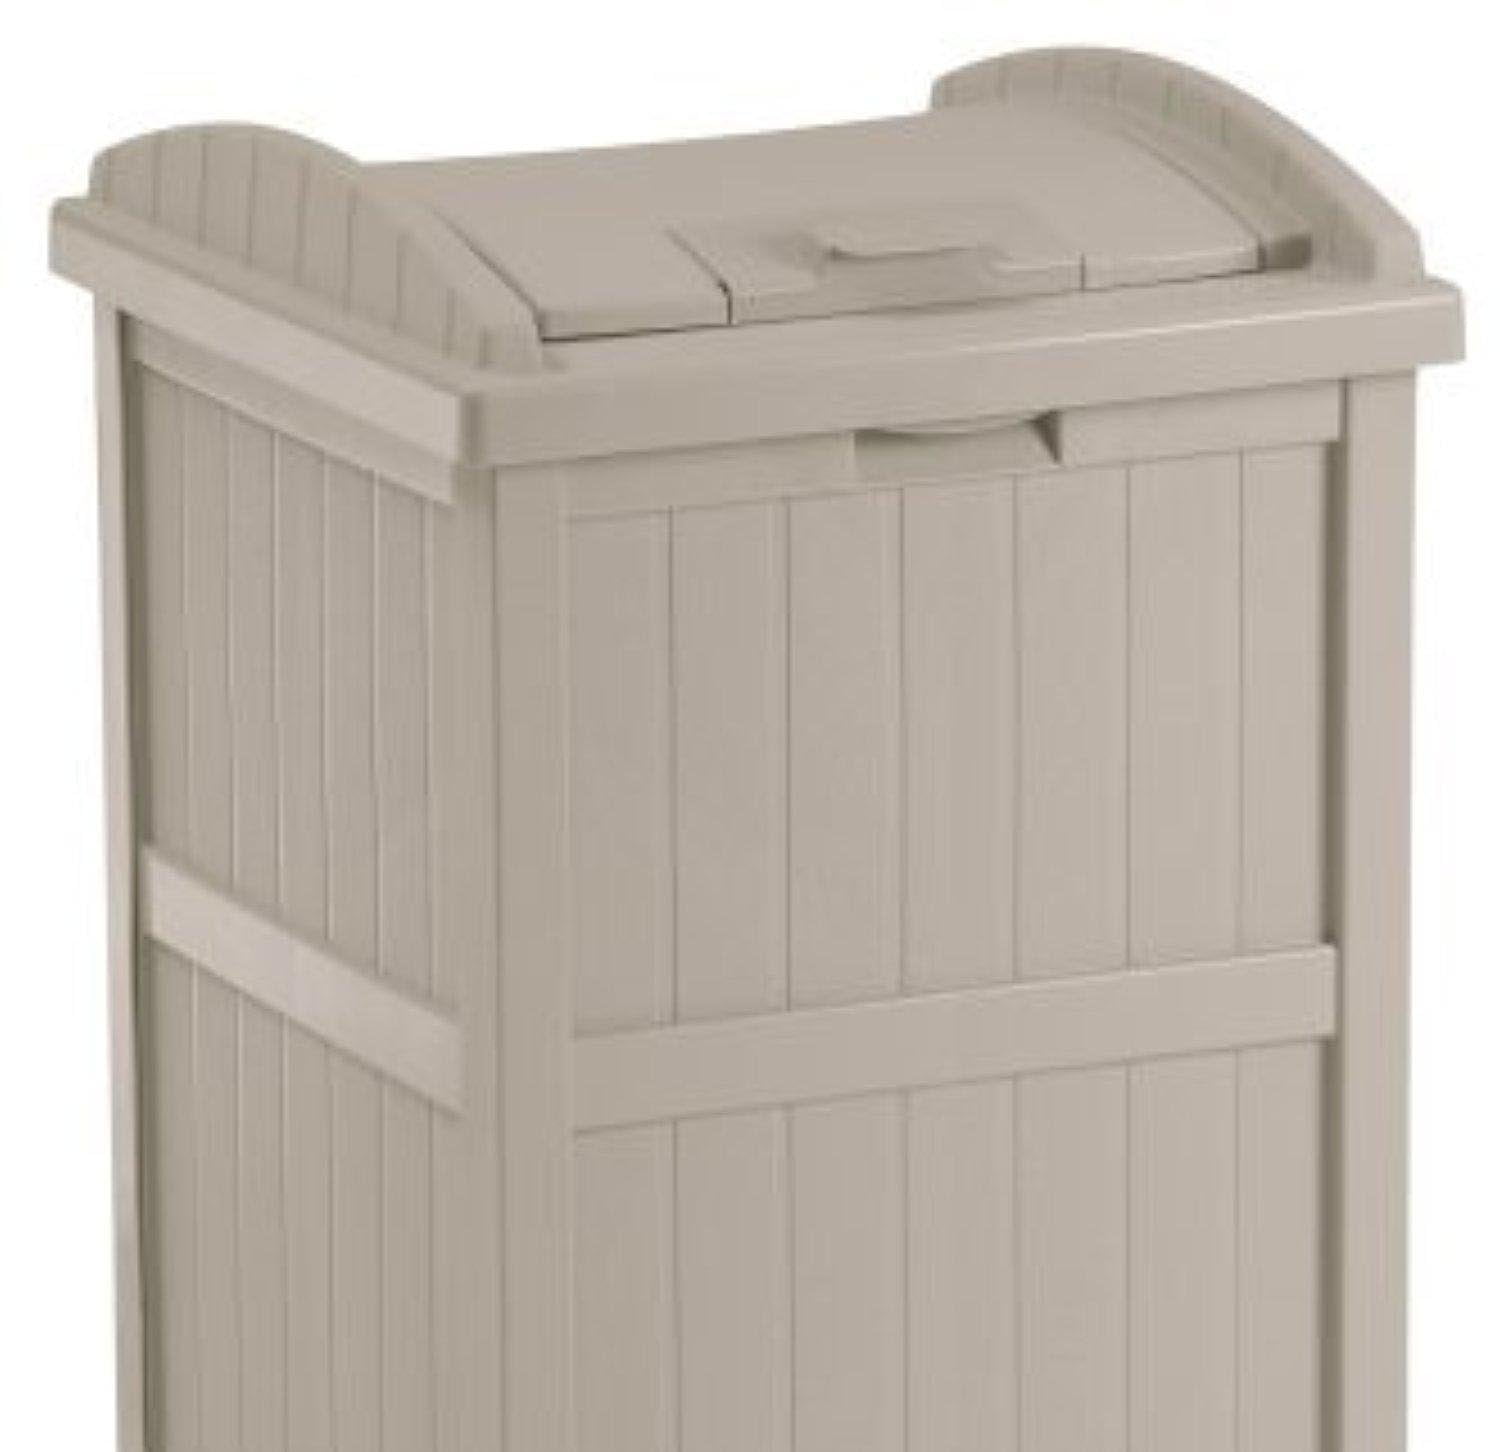 Suncast 33 Gallon Durable Plastic Hideaway Outdoor Garbage Can with Secure  Lid and Wicker Design for Home Backyards, Decks, or Patios, Java Brown